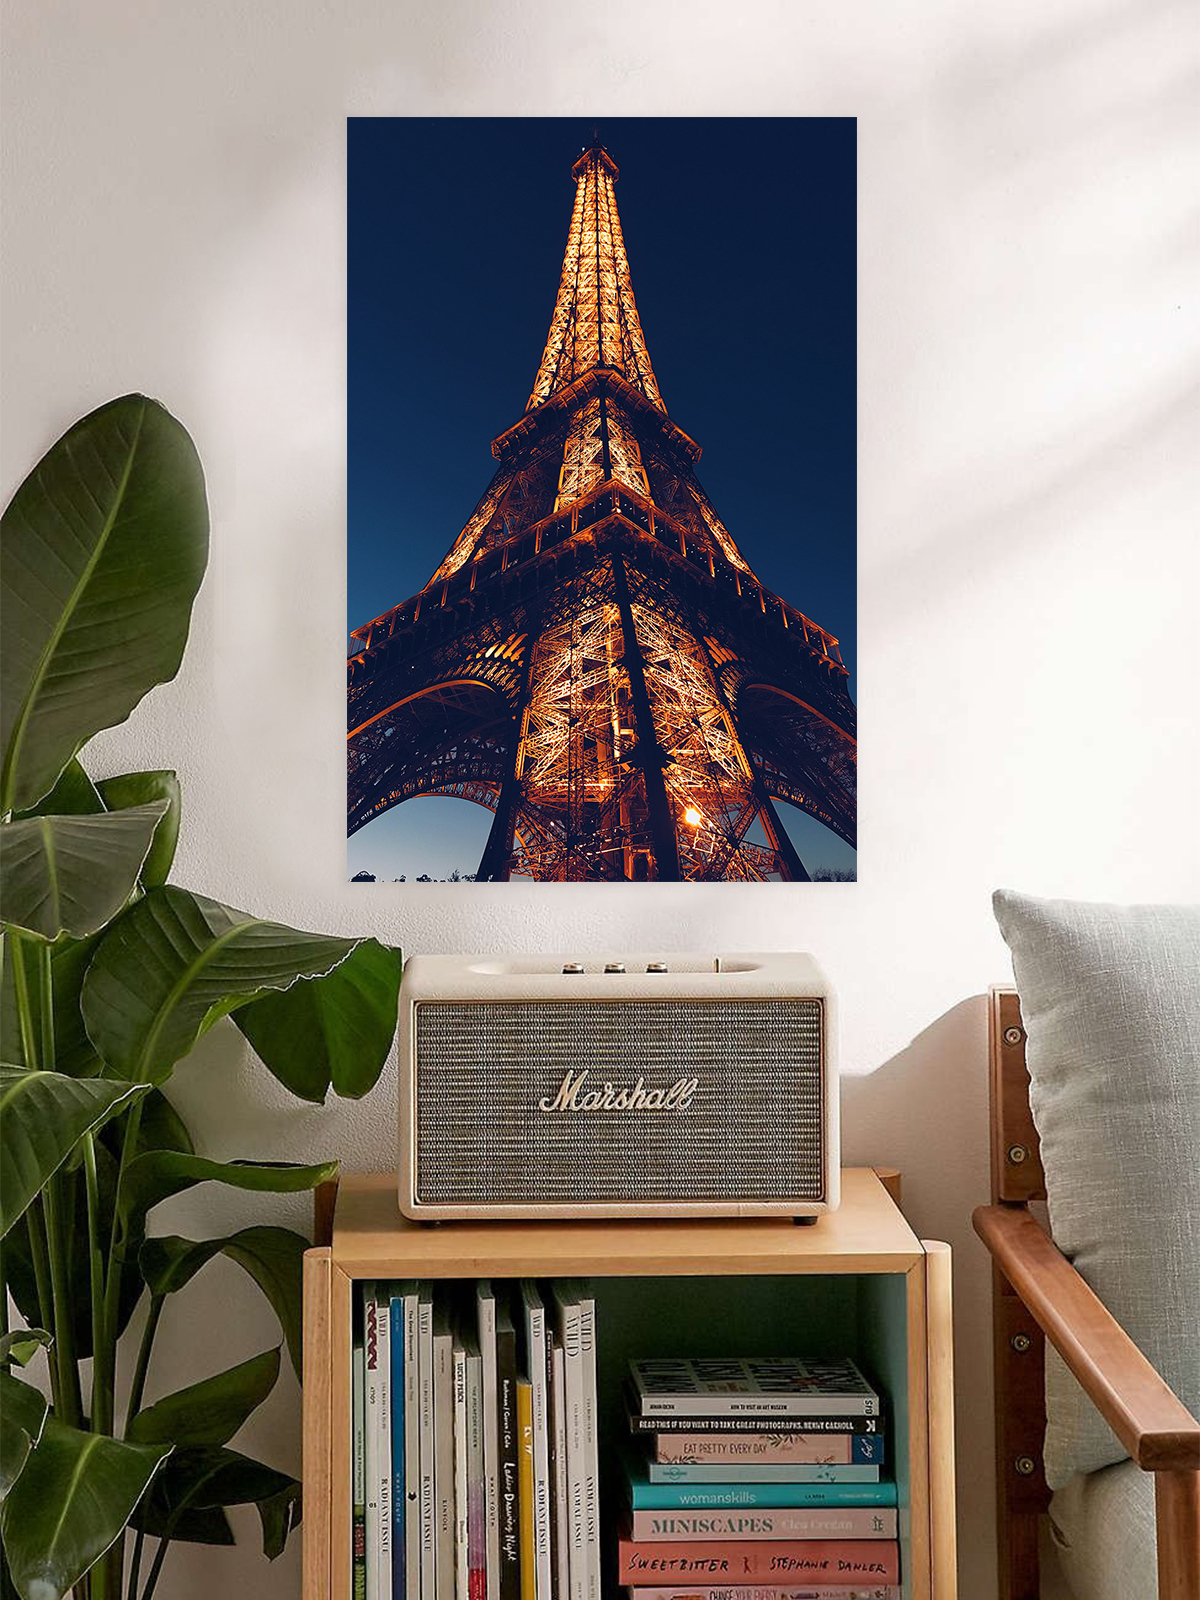 Awkward Styles Eiffel Tower Unframed Poster Paris City View Printed Artwork Housewarming Decor Gifts Ideas Printed Photo Pictures Paris Printed Poster Art Eiffel Tower Poster Decor Paris Night View - image 2 of 3